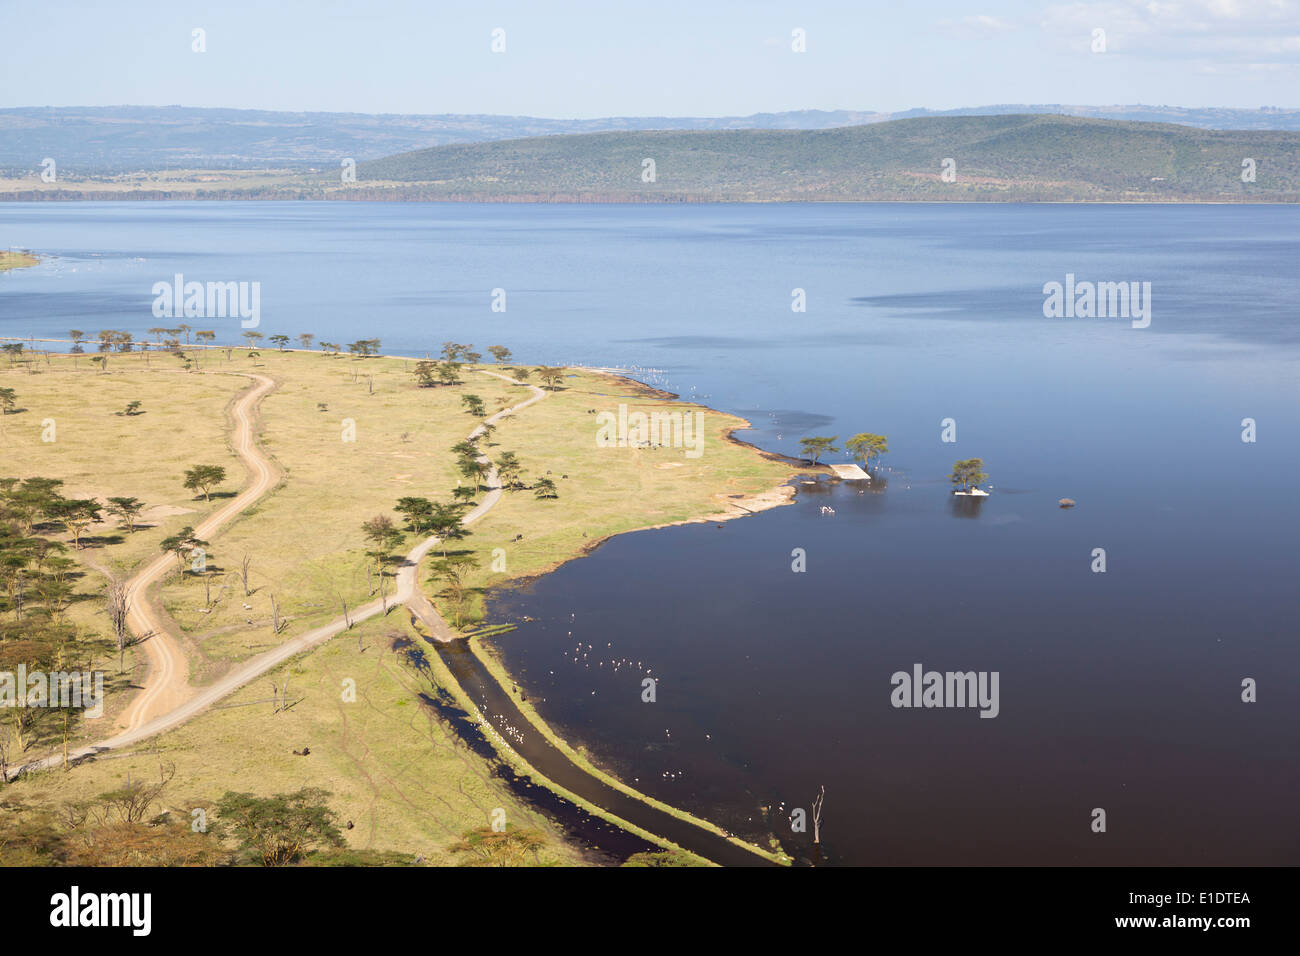 Lake in Nakuru National Park seen from an observation point in Kenya. Stock Photo